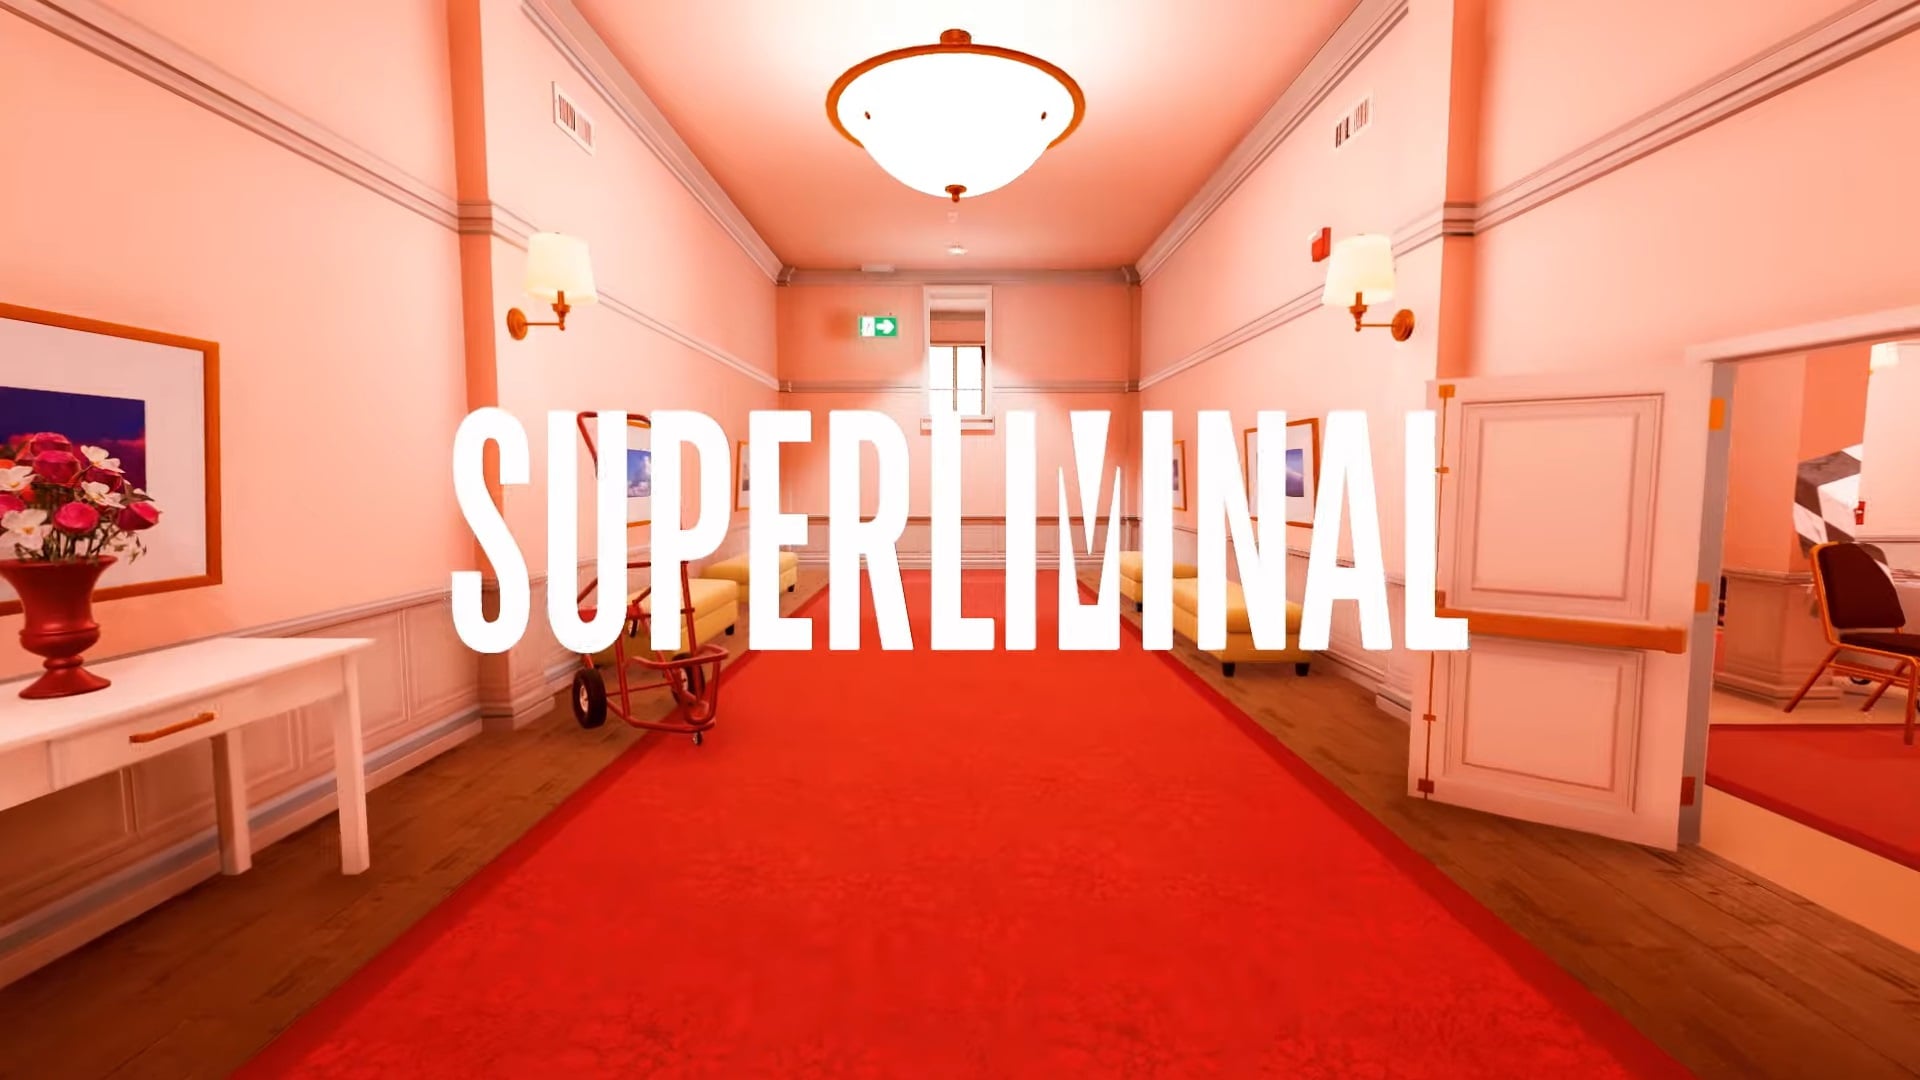 Let’s Play Superliminal